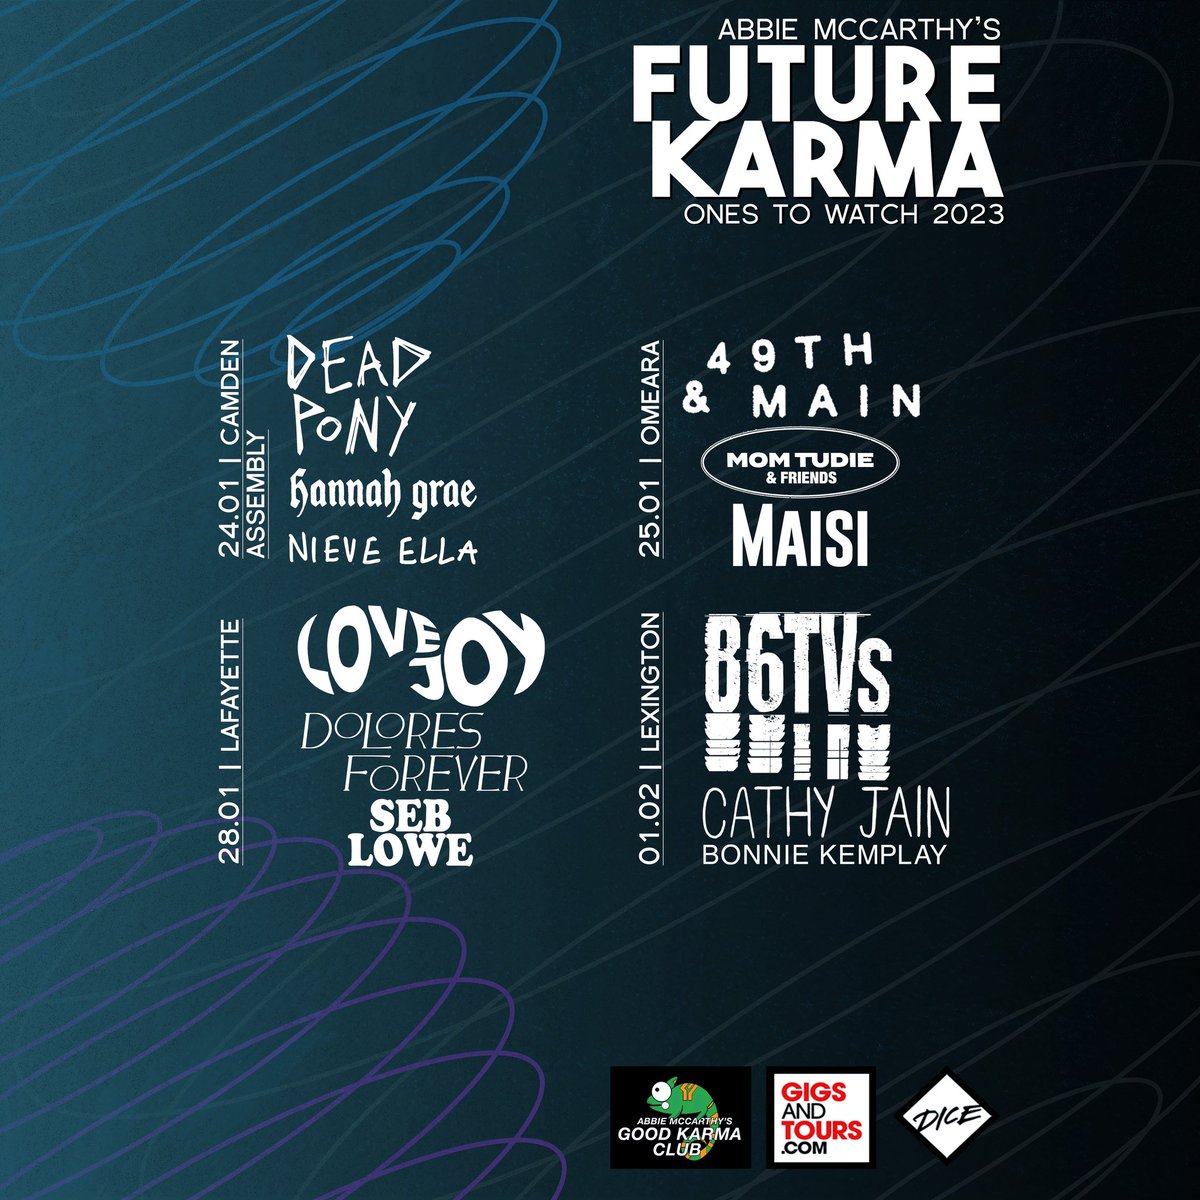 soooo happy to announce that i’ll be playing @AbbieAbbiemac ‘s Future Karma show 01.02 with the amazing @86TVsband and @BonnieKemplay !! gonna be a sick night 🫶🫶